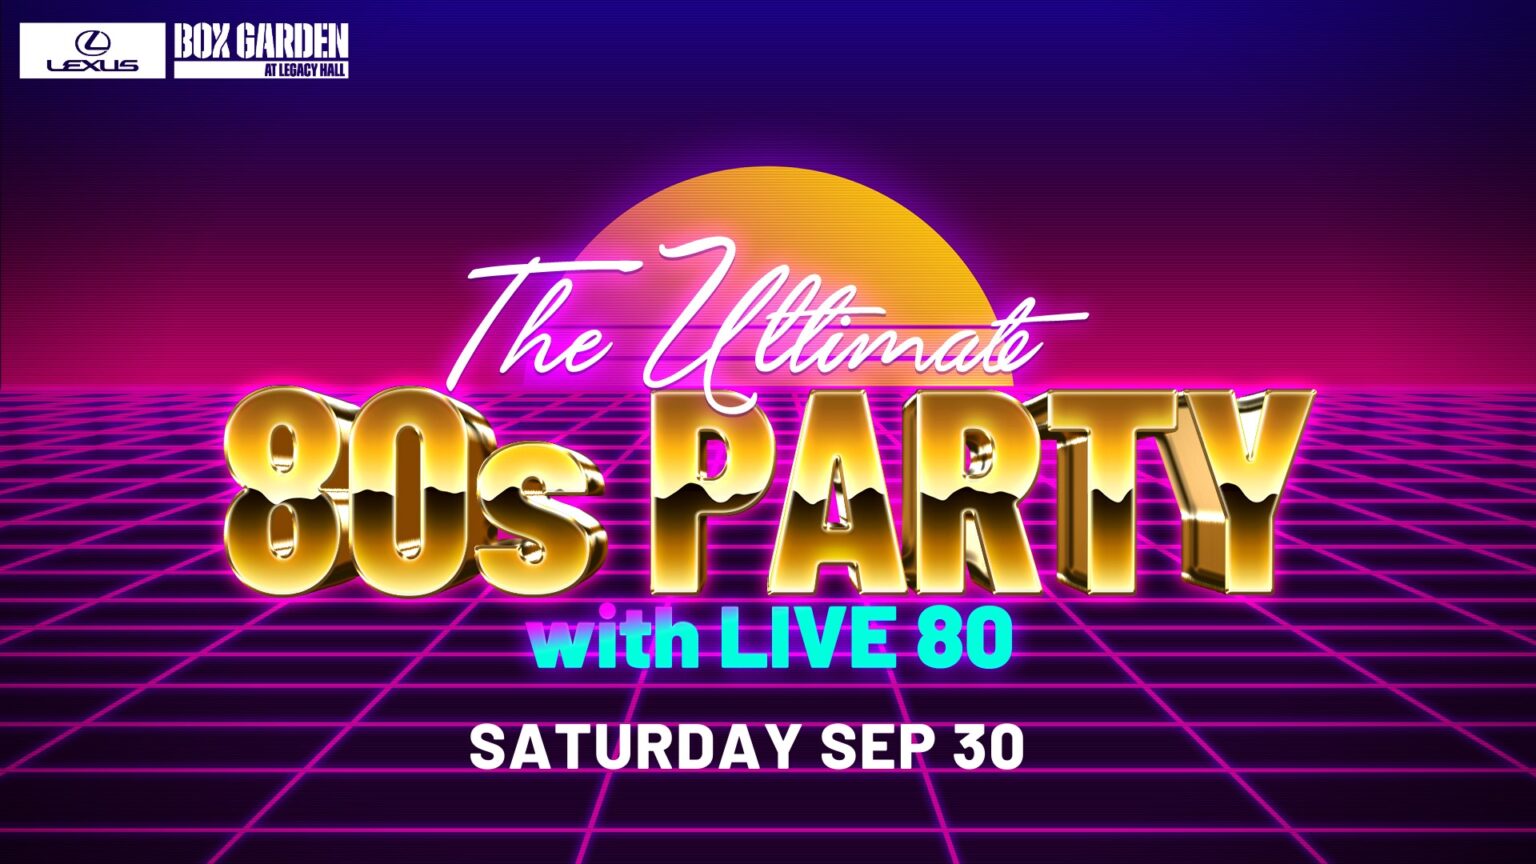 Live 80 The Ultimate 80s Experience